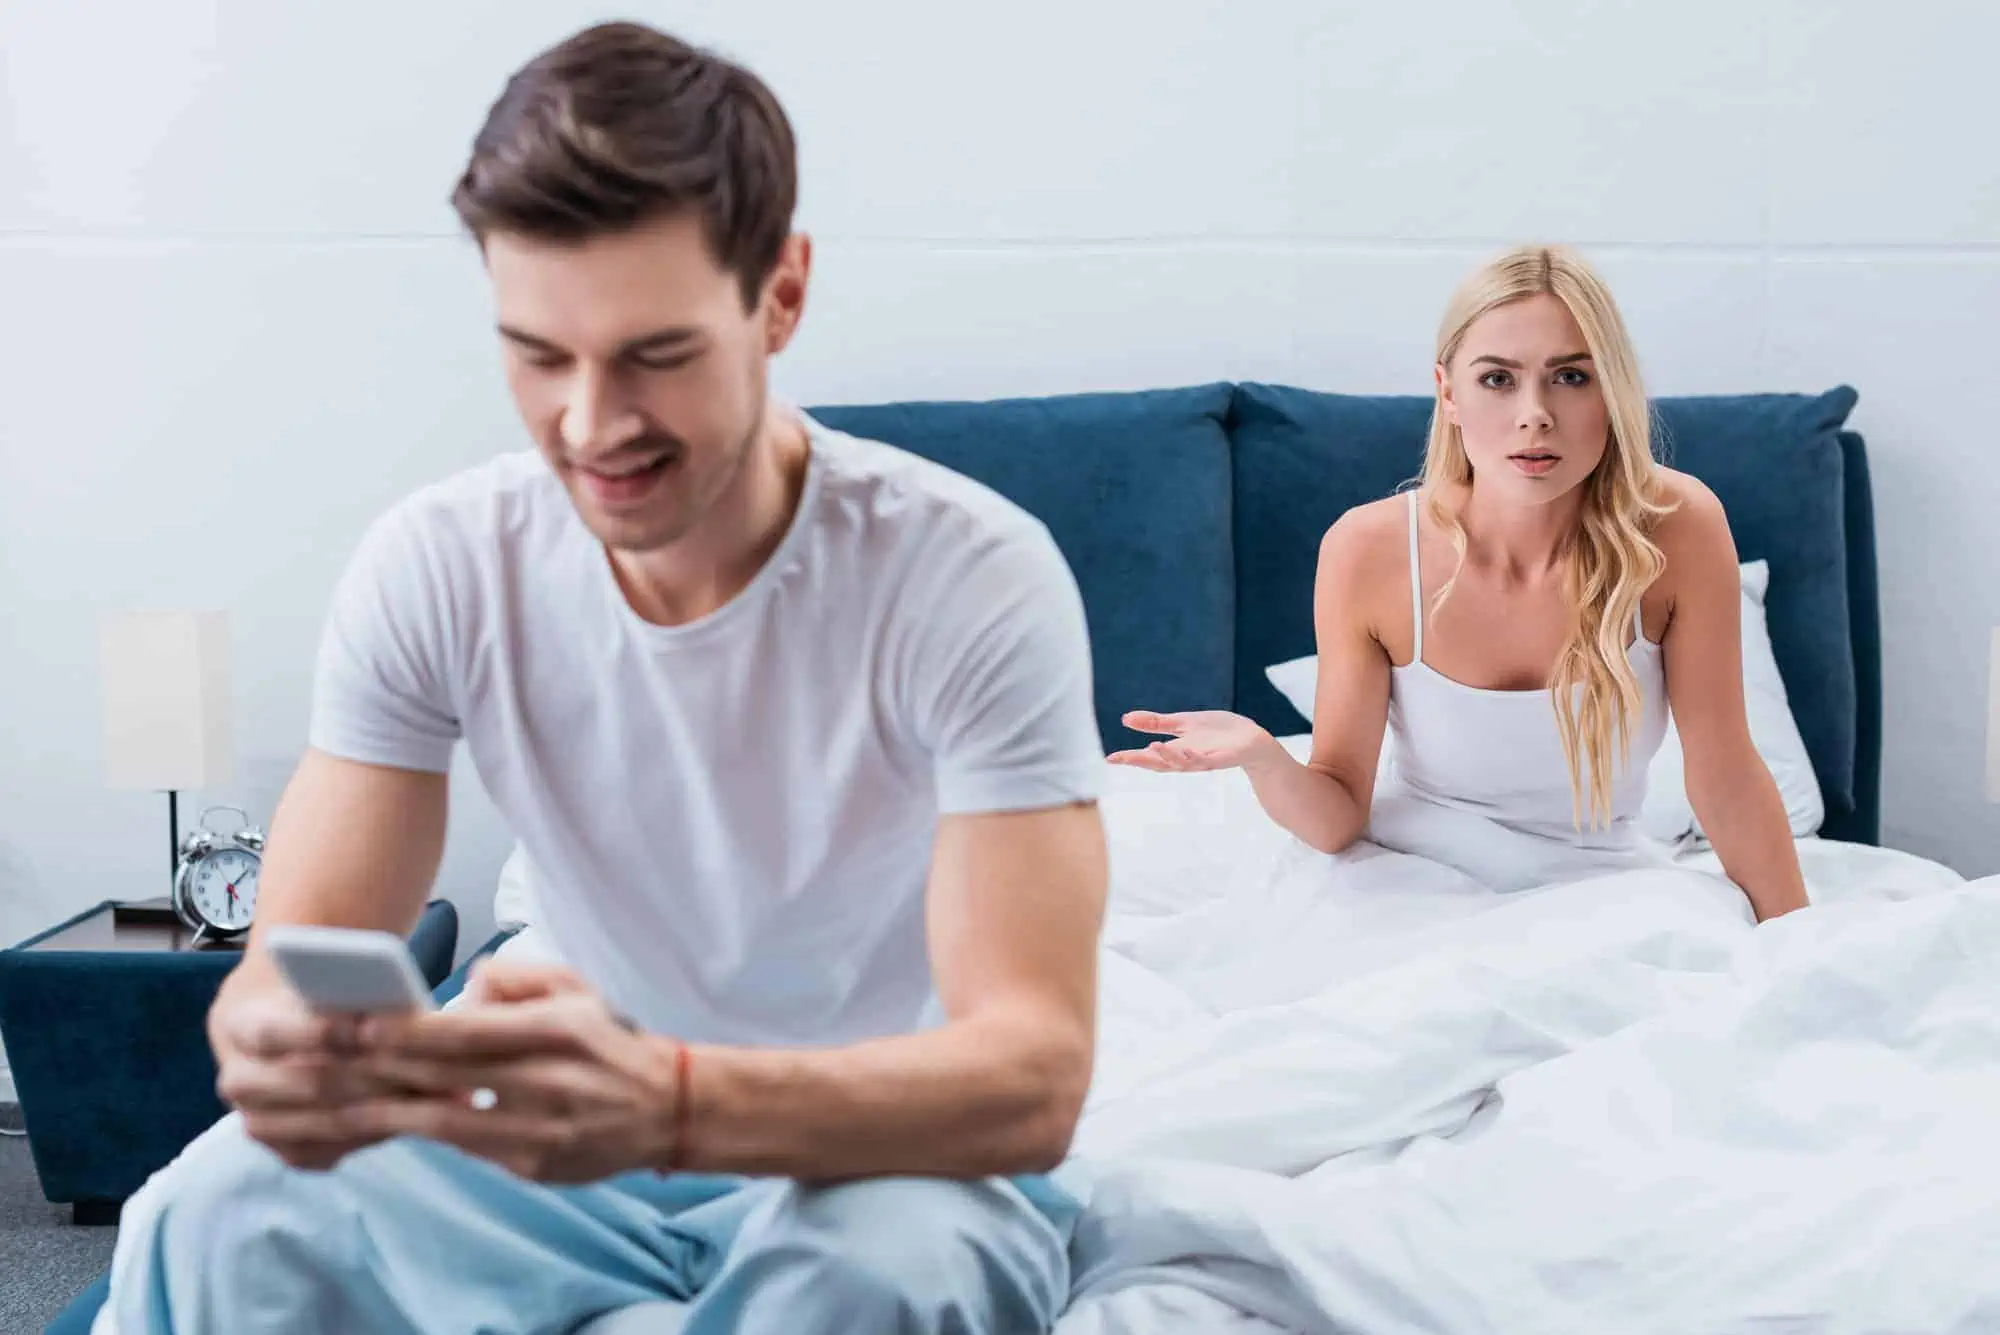 A man and woman sitting on a bed looking at a cell phone